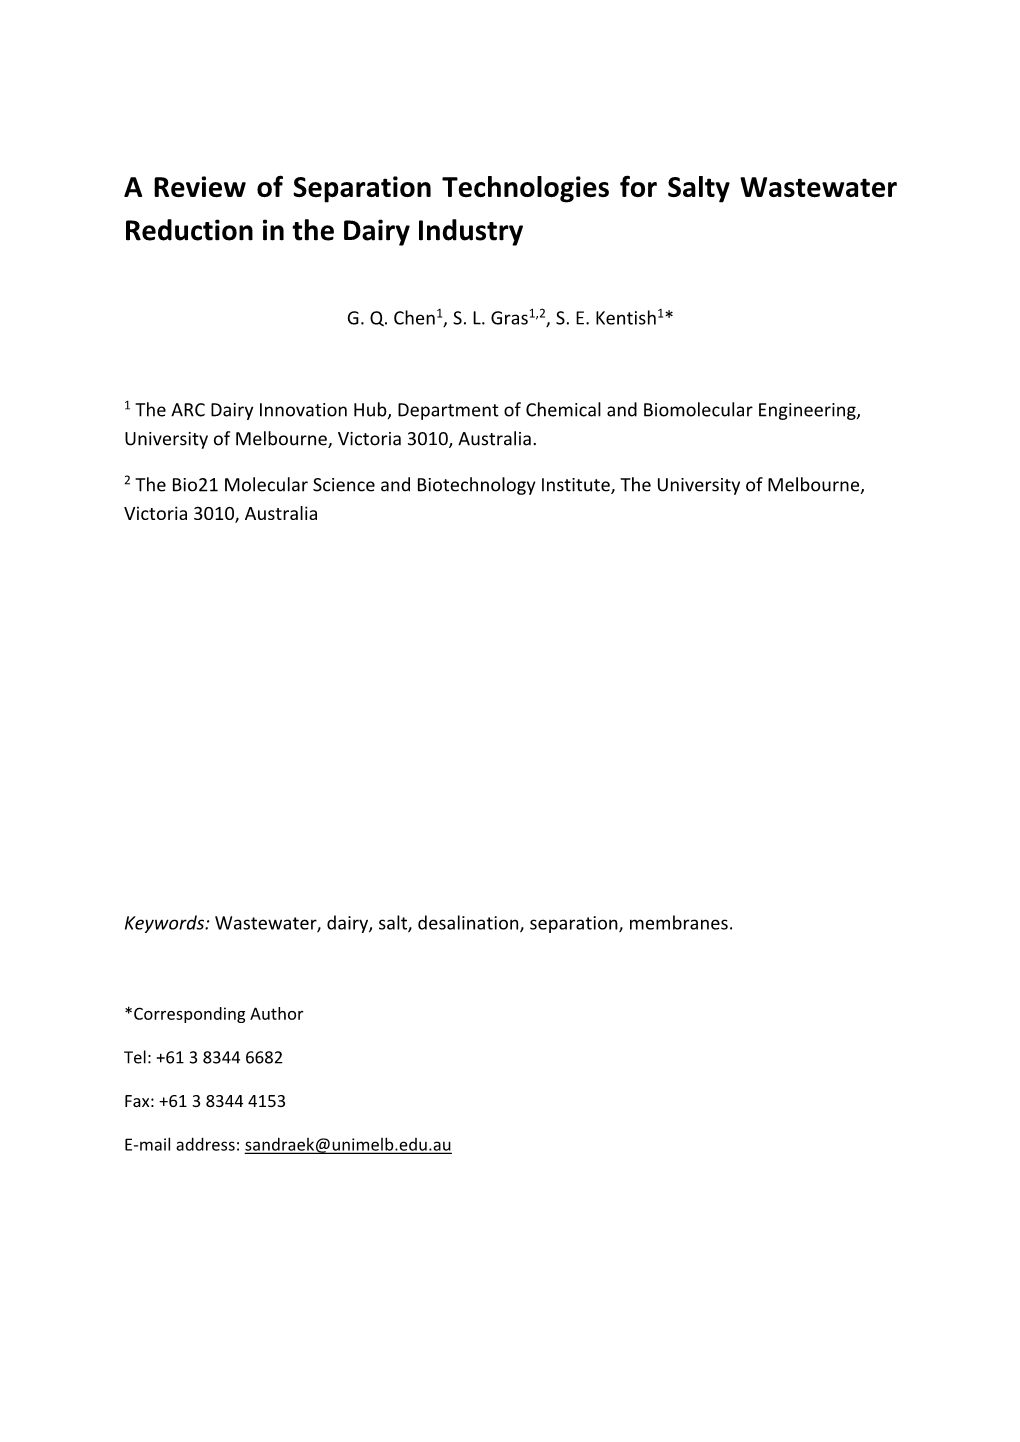 A Review of Separation Technologies for Salty Wastewater Reduction in the Dairy Industry